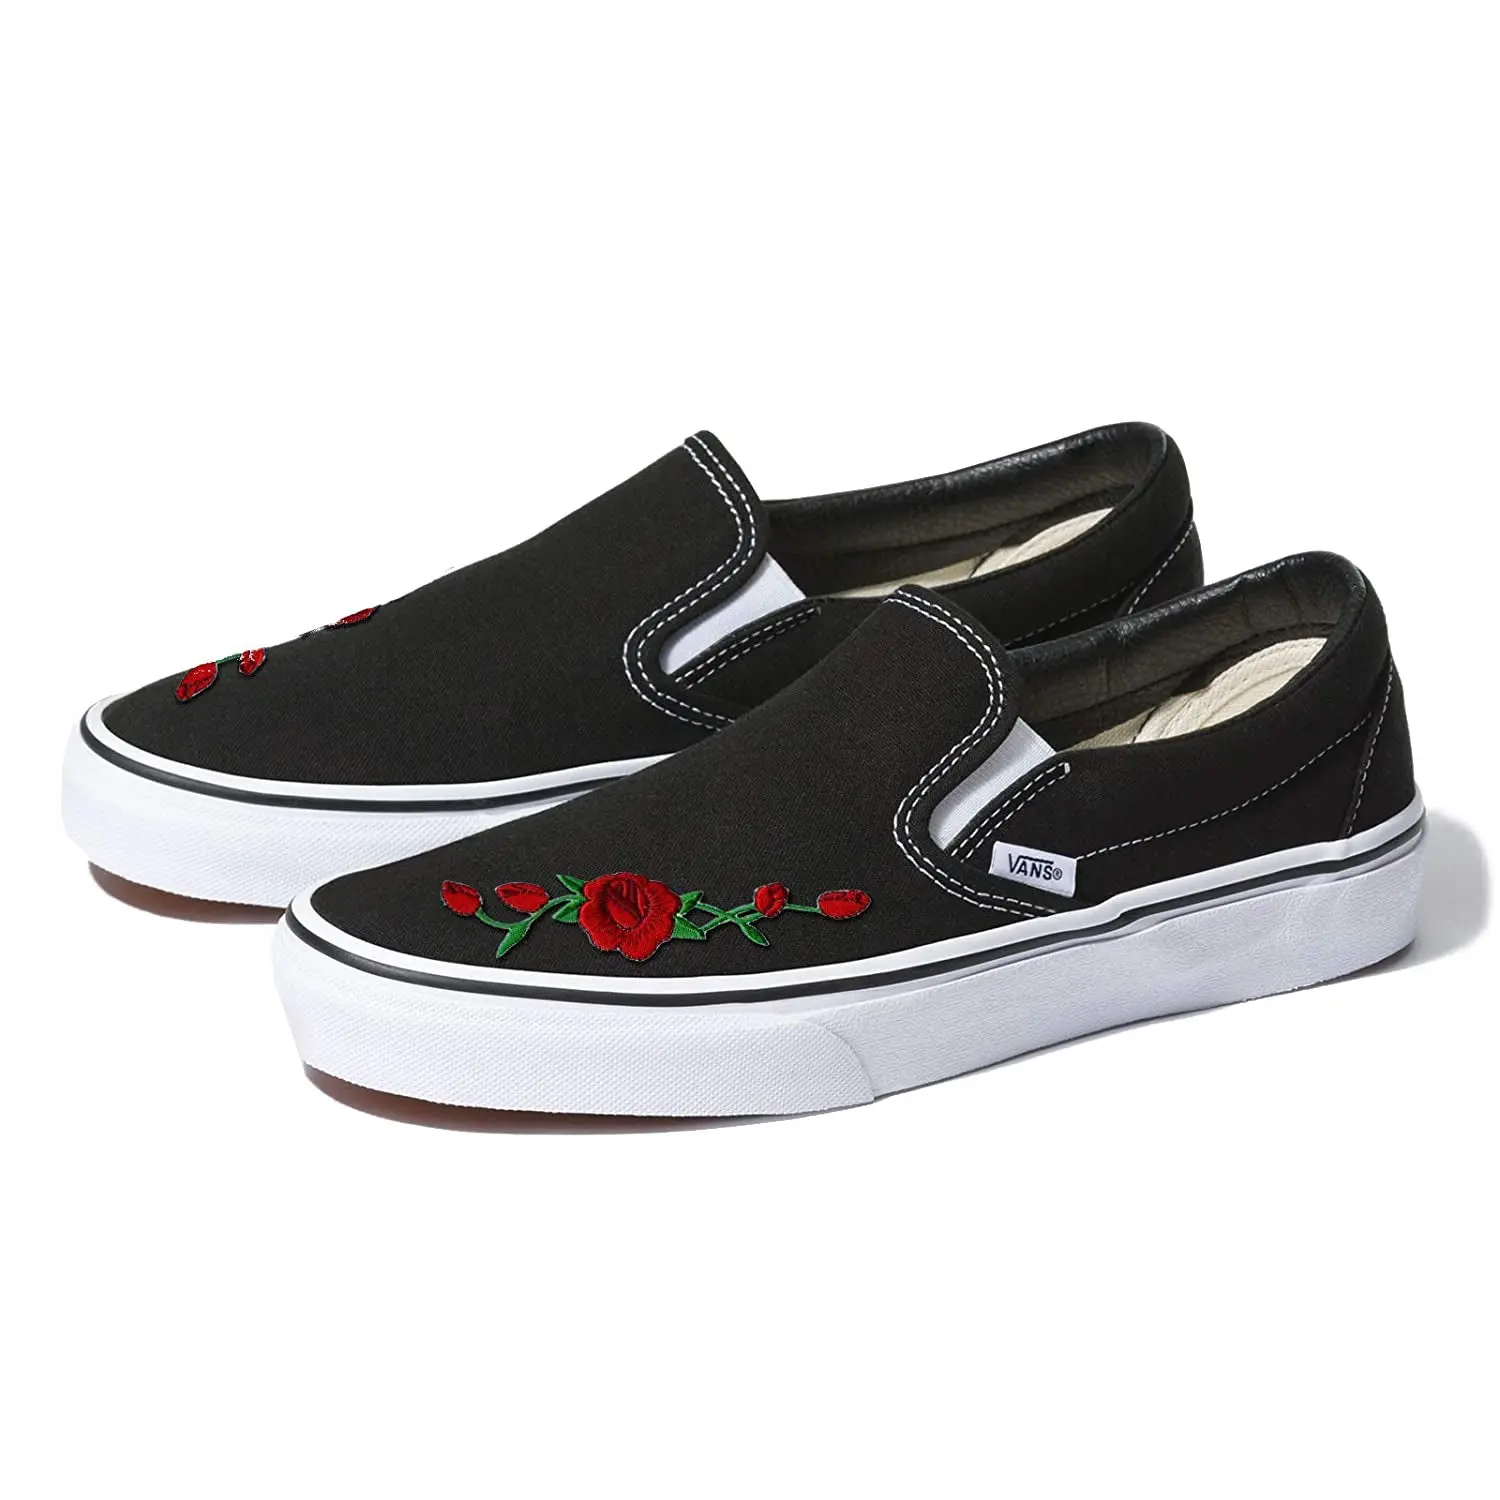 Red Rose Custom Shoes Embroidery | eBay